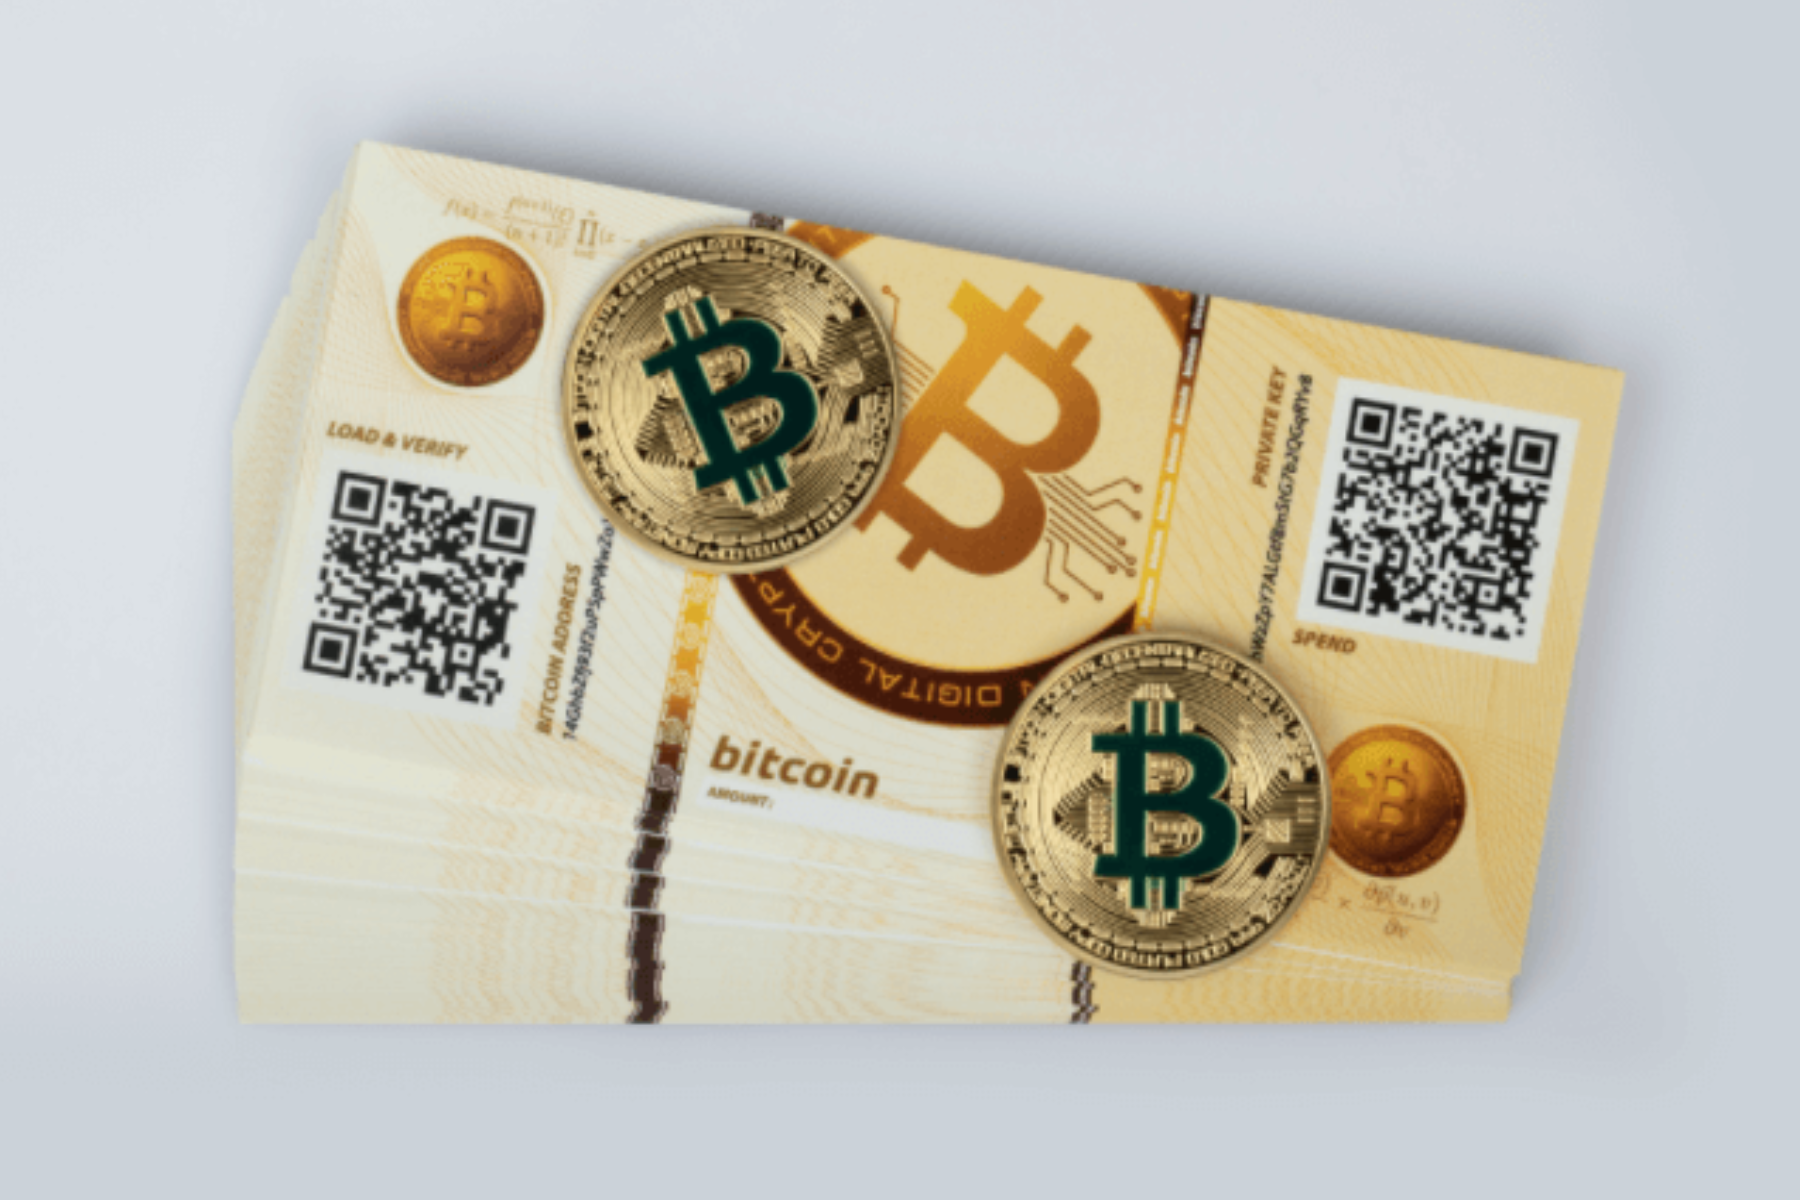 Crypto paper currency and coins